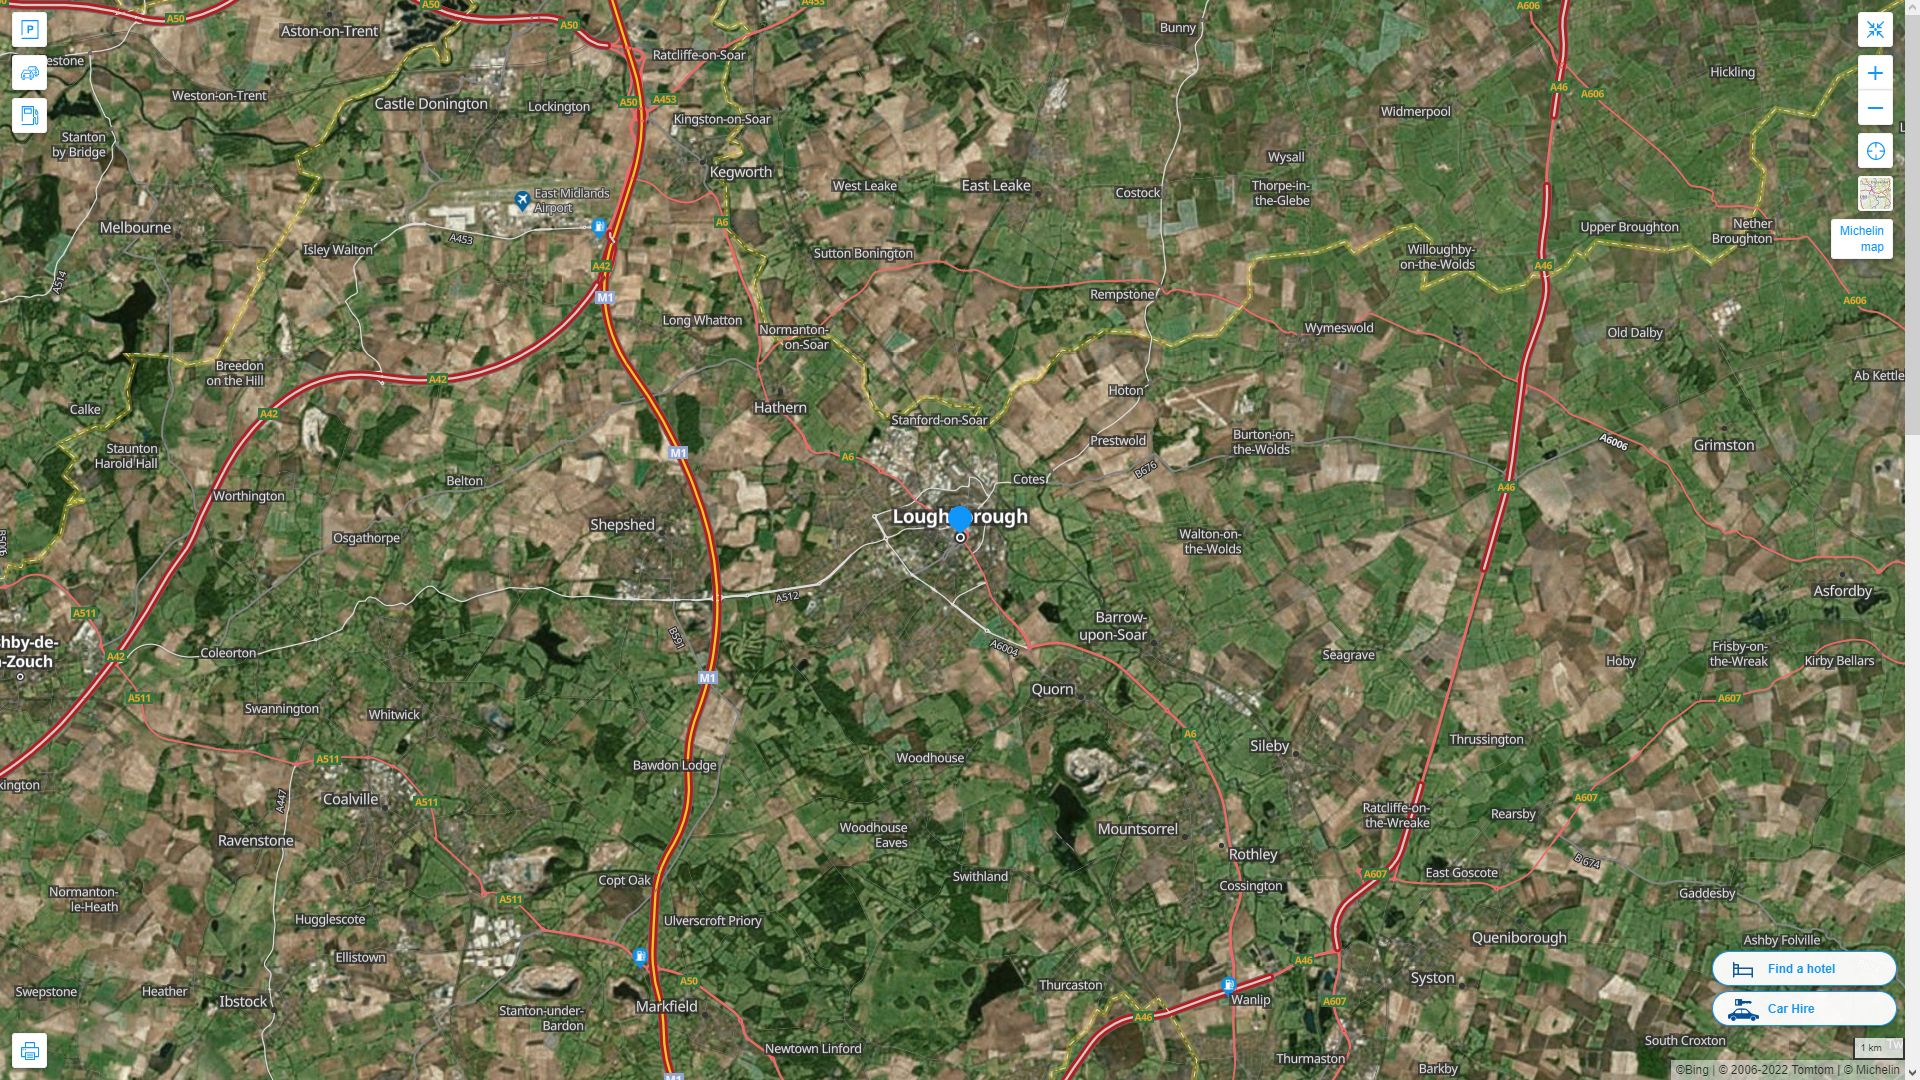 Loughborough Highway and Road Map with Satellite View